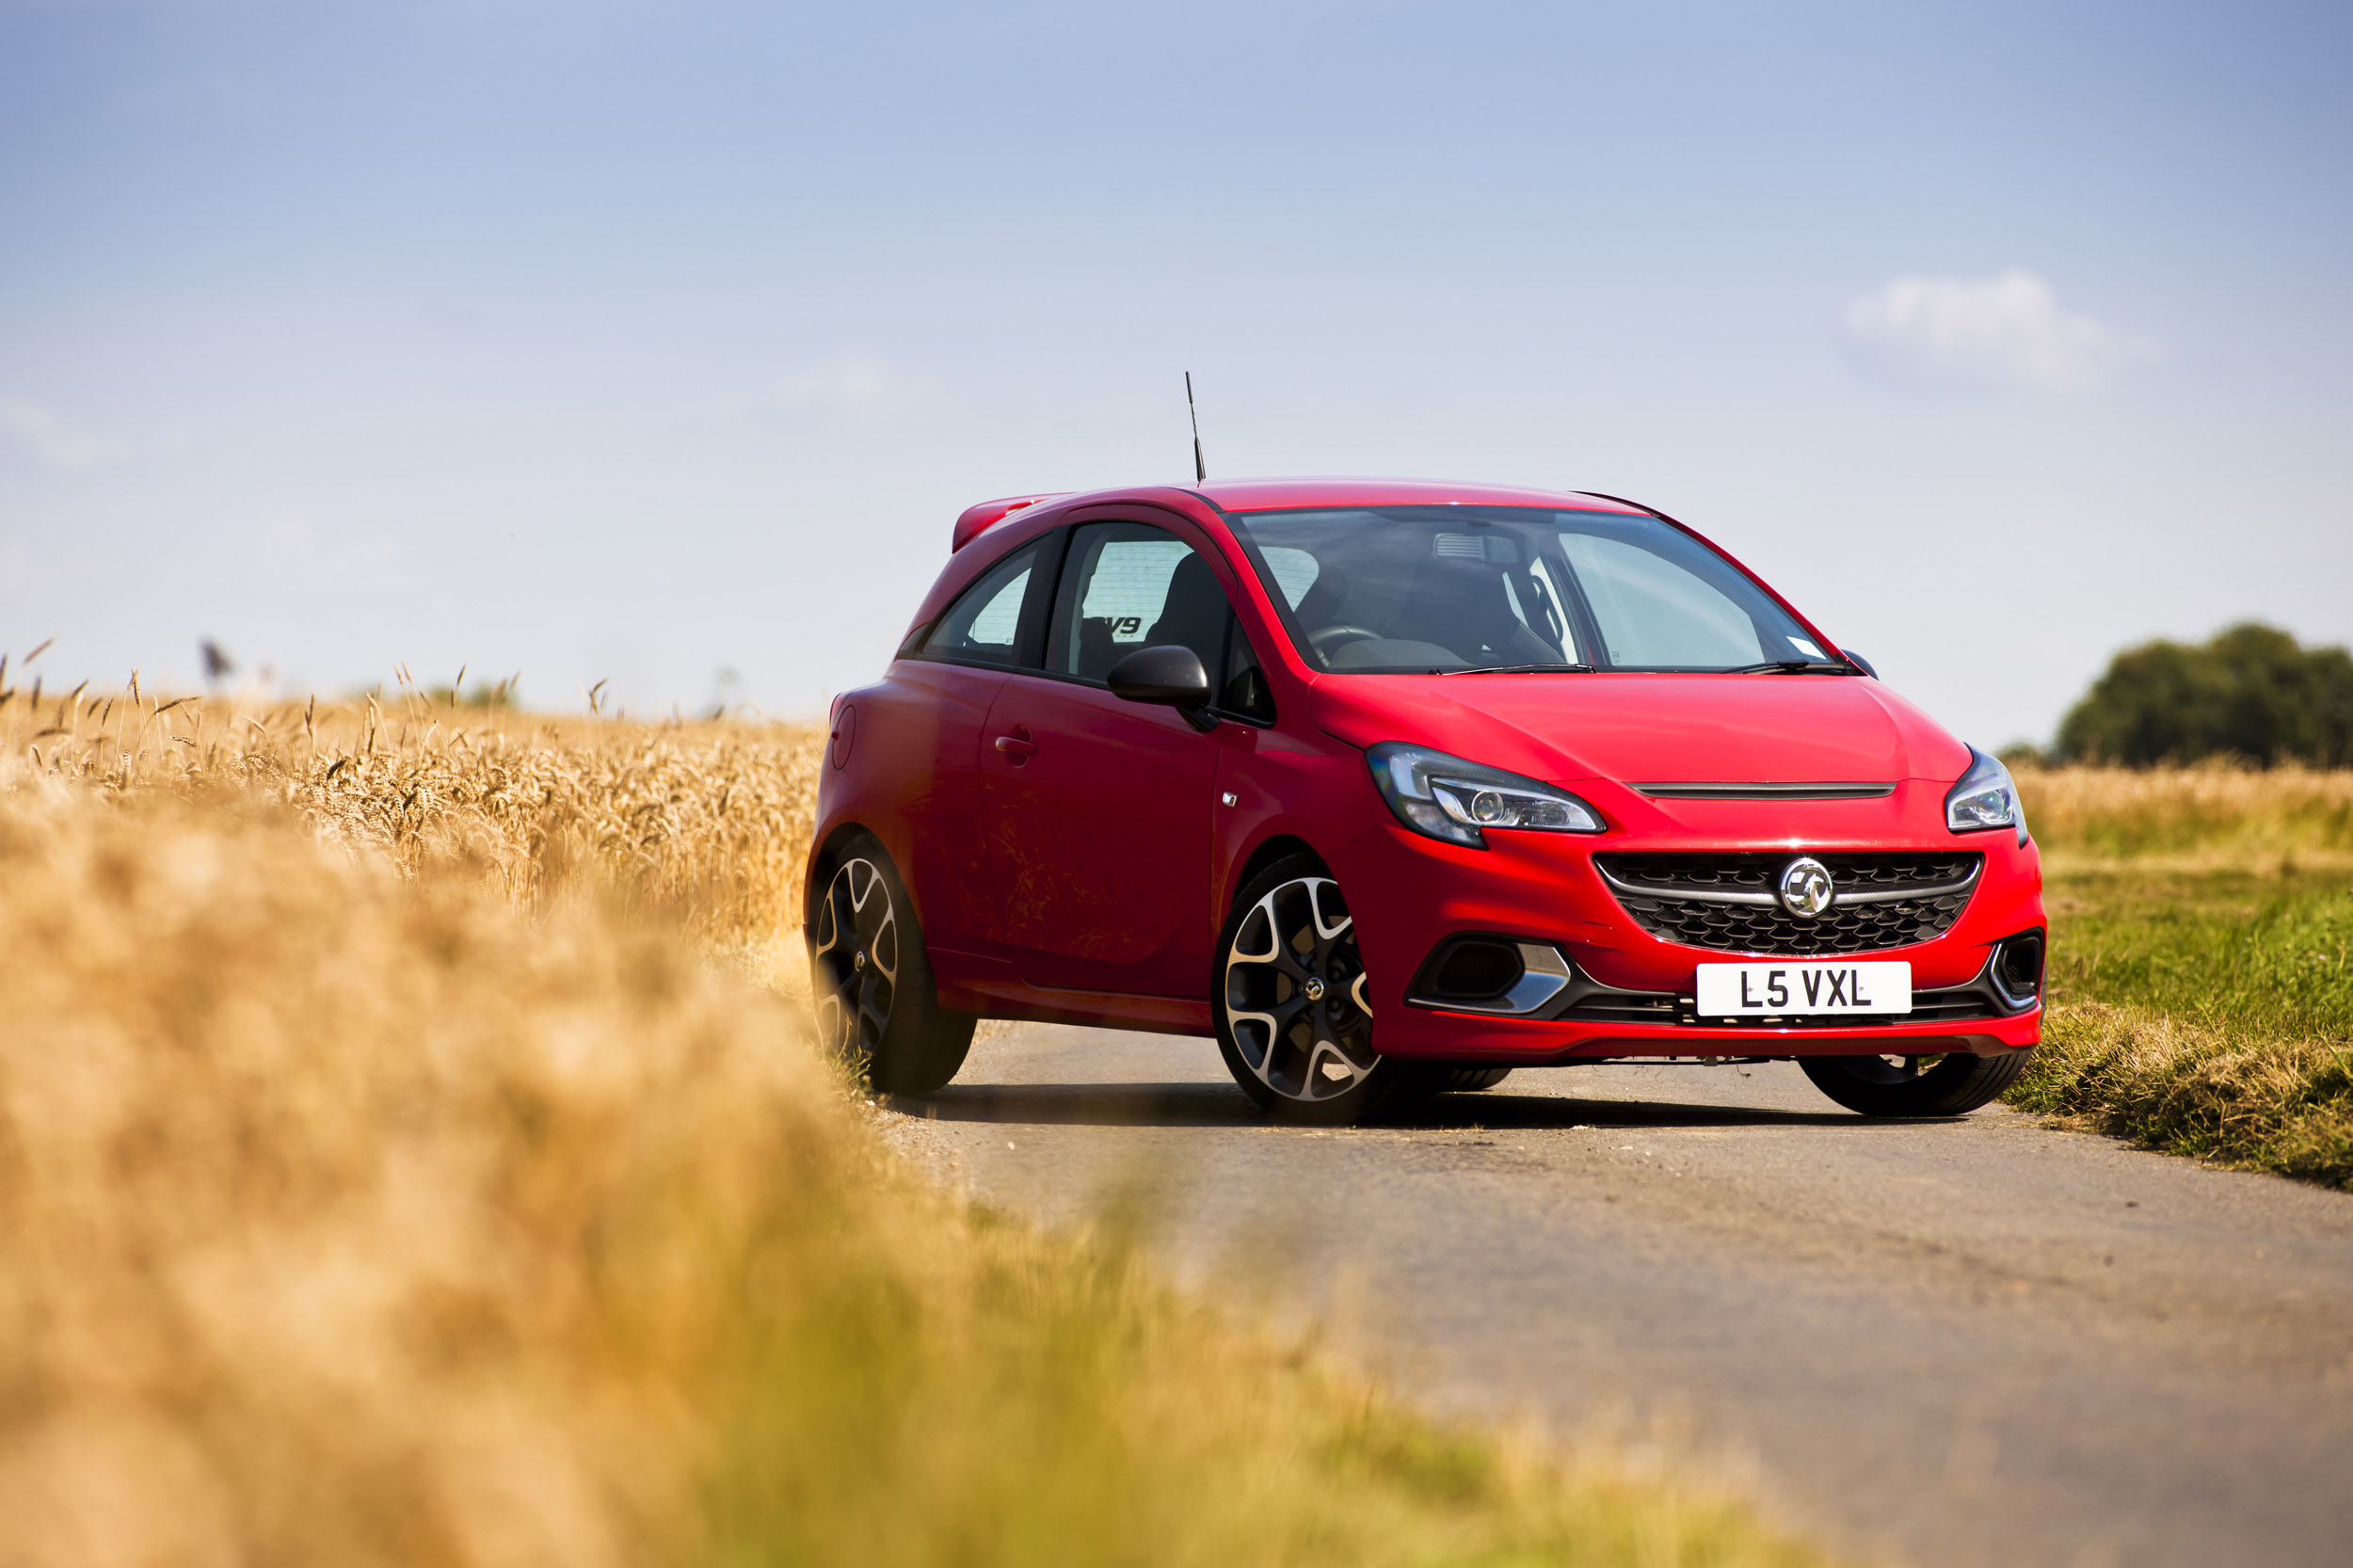 Vauxhall Corsa VXR review - prices, specs and 0-60 time